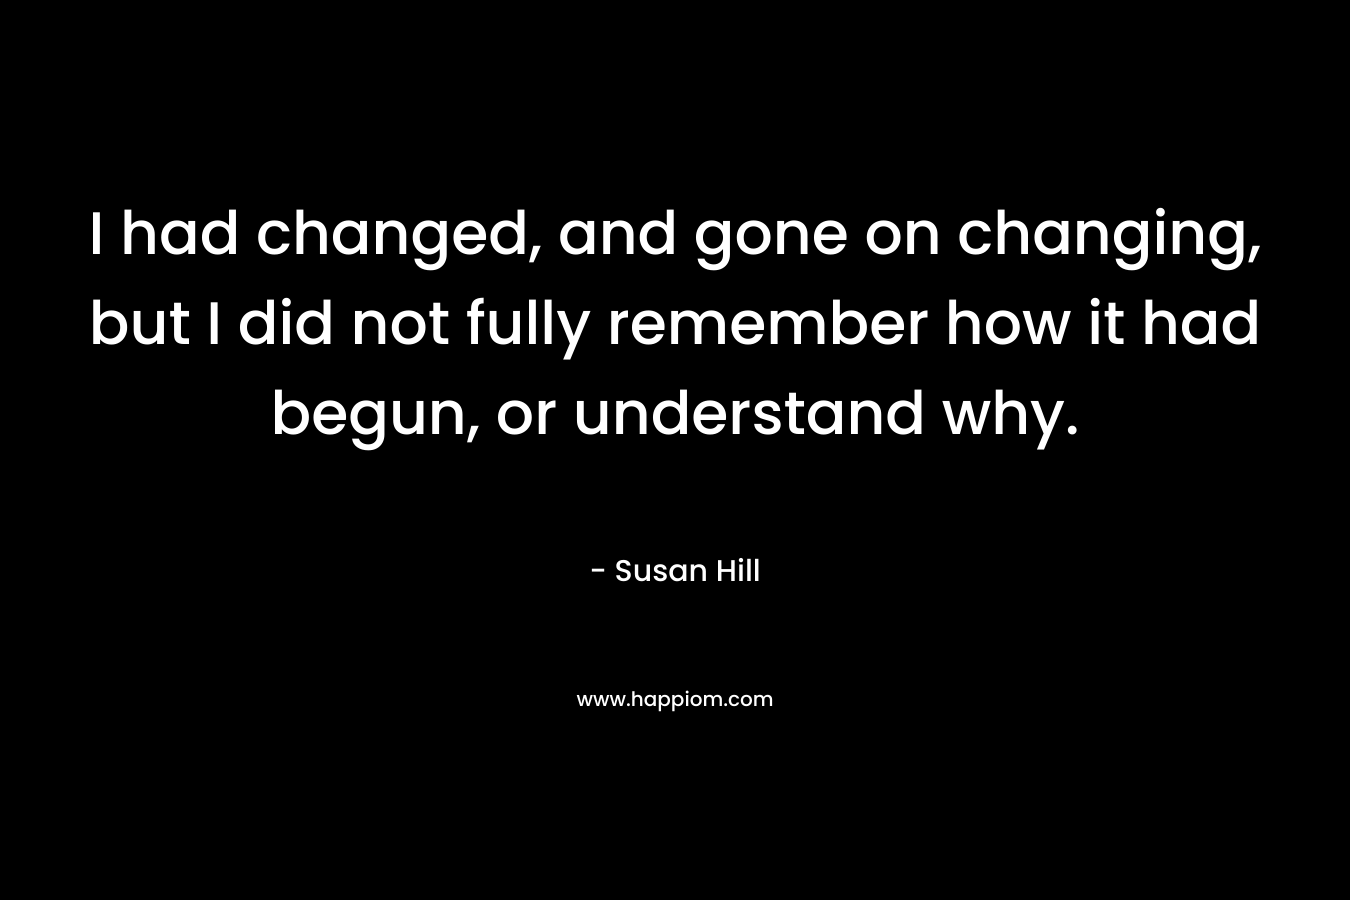 I had changed, and gone on changing, but I did not fully remember how it had begun, or understand why.